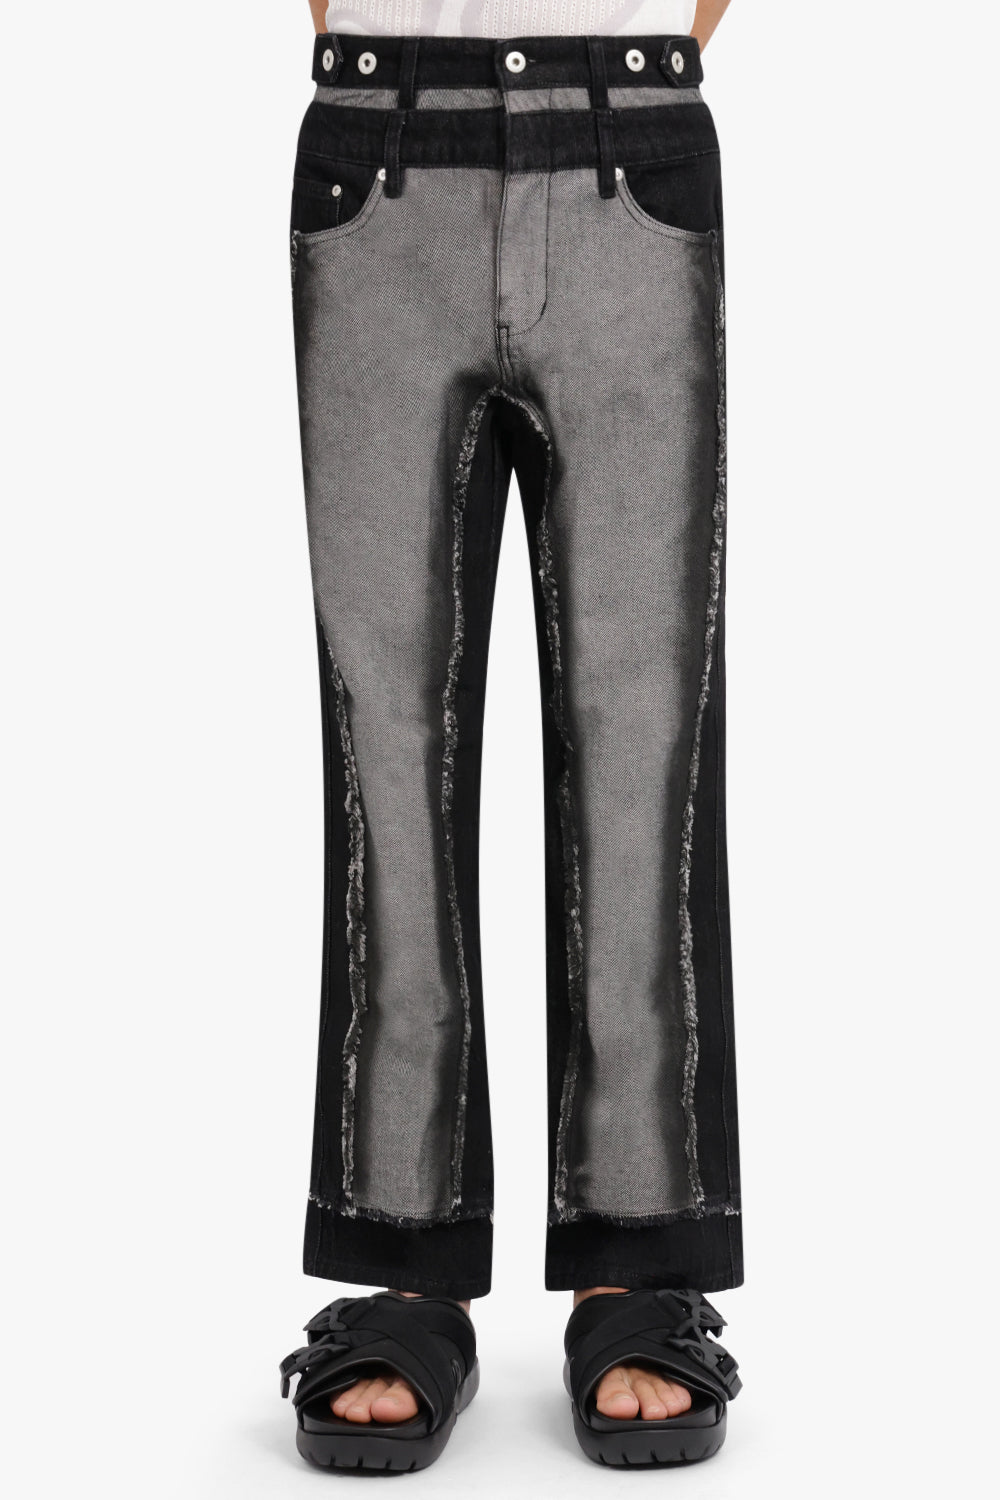 FENG CHEN WANG RTW RAW EDGE PATCHWORK TROUSERS | BLACK/GREY